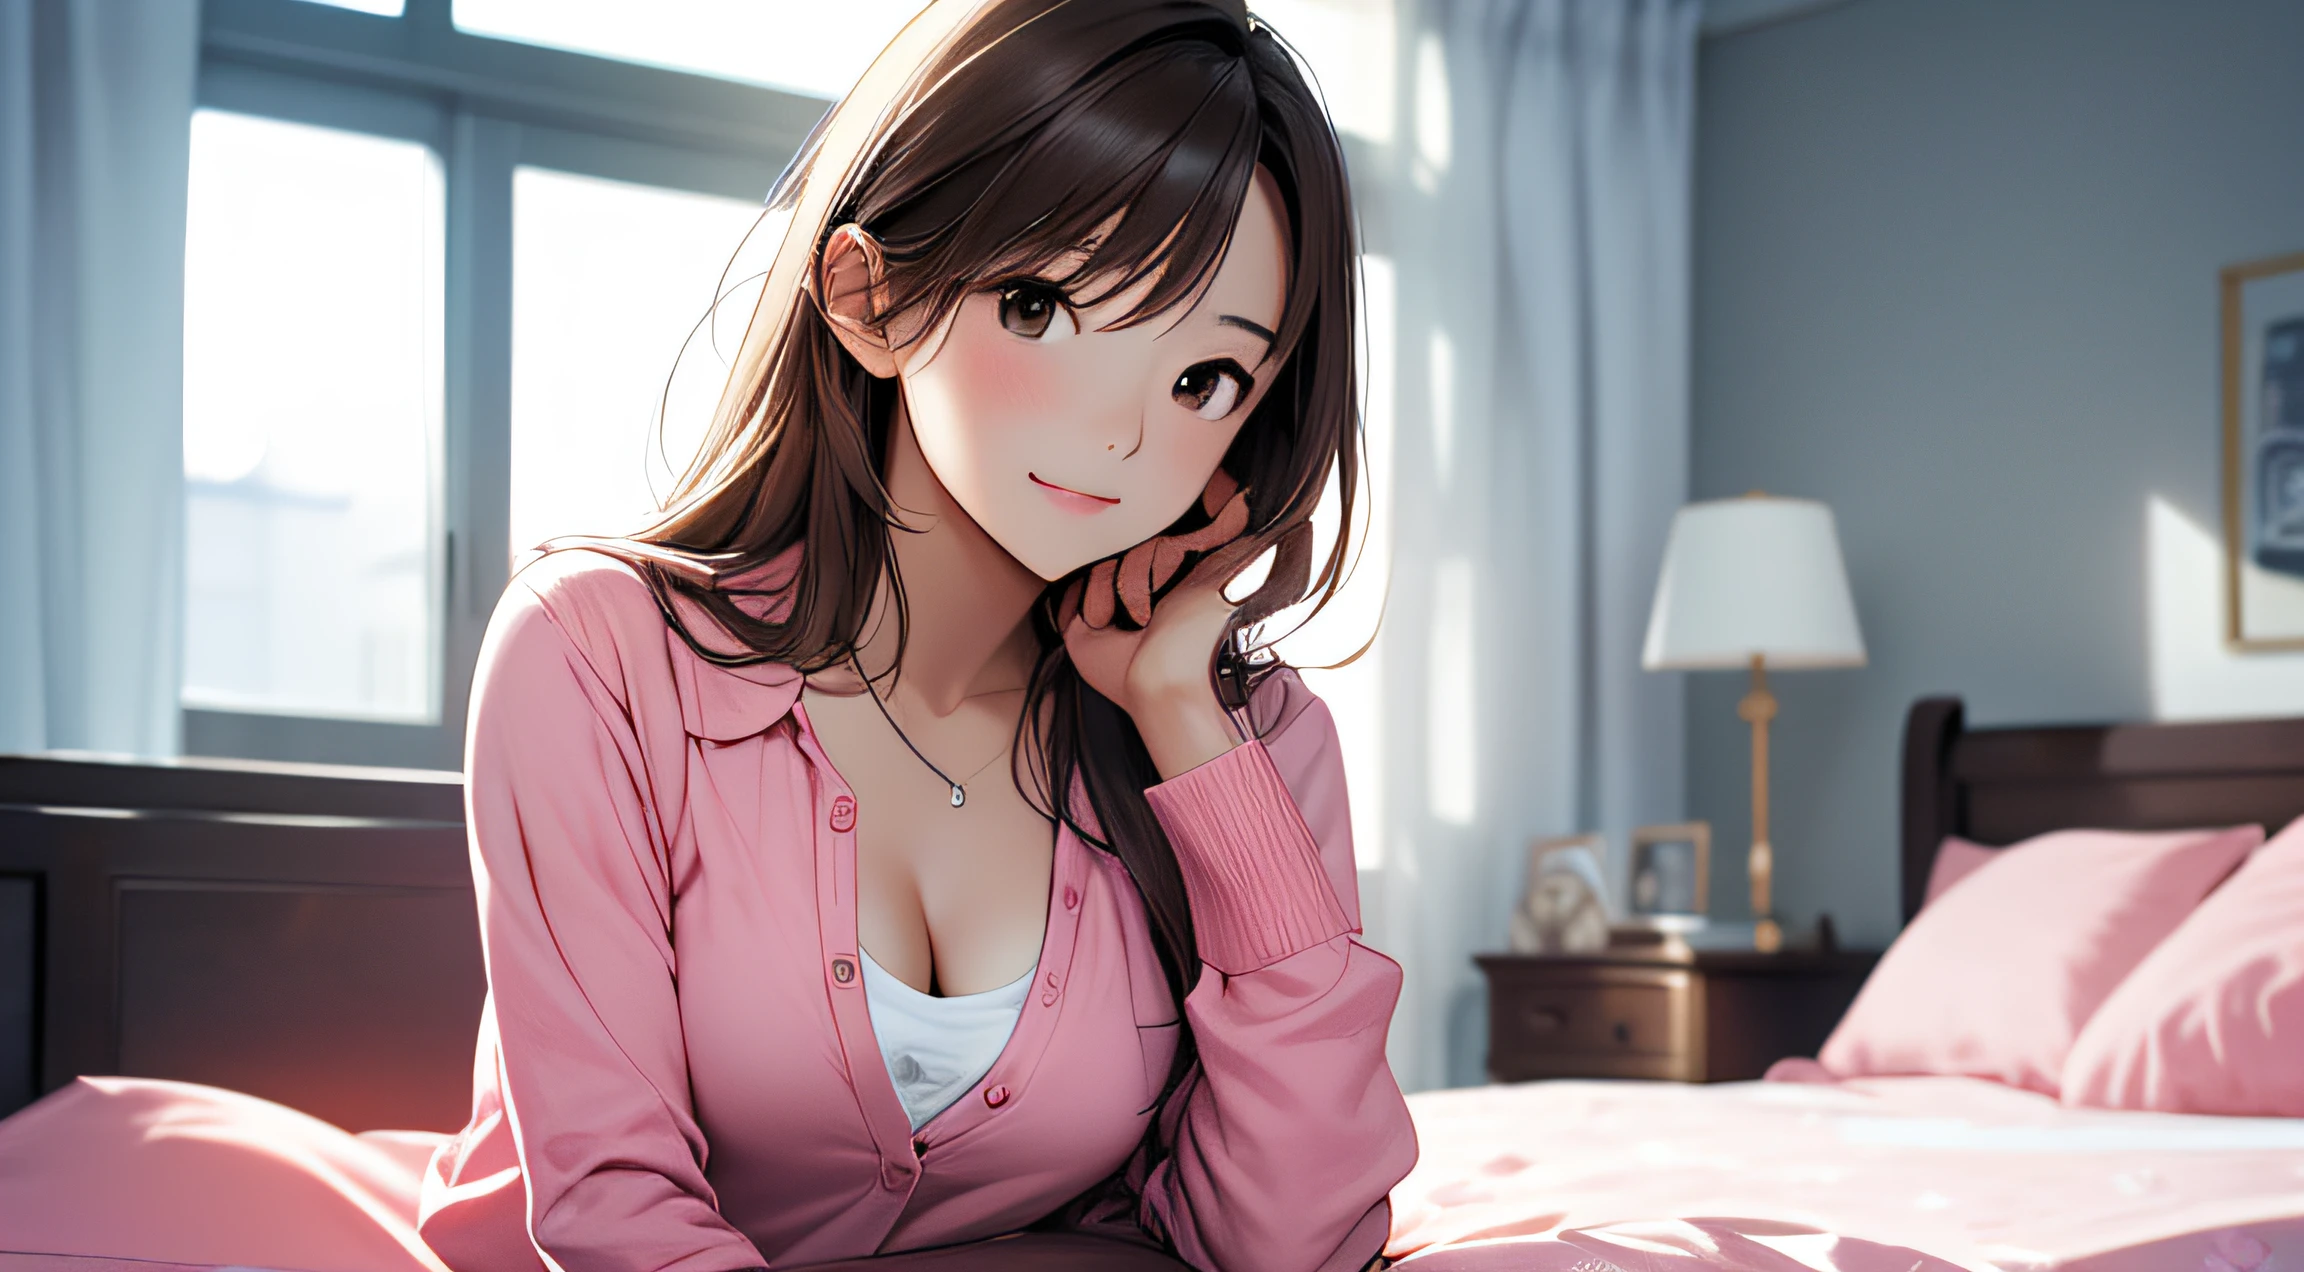 （A Certain Science Railgun、Seo Yeon Joo）、Brown skin、pink mini long sleeve shirt、（Medium hair in pink color）、Young、Cute、a beautifulchi girl、Perfect style、larjeBoobs、sexy legs, cute pose, smiling, Emphasizes cleavage、deadpan、realisic、Realistic、８ｋ、Heavily detailed、best quality、Top image quality、high-resolution、A masterpice、only girl、（The background is a mattress）、